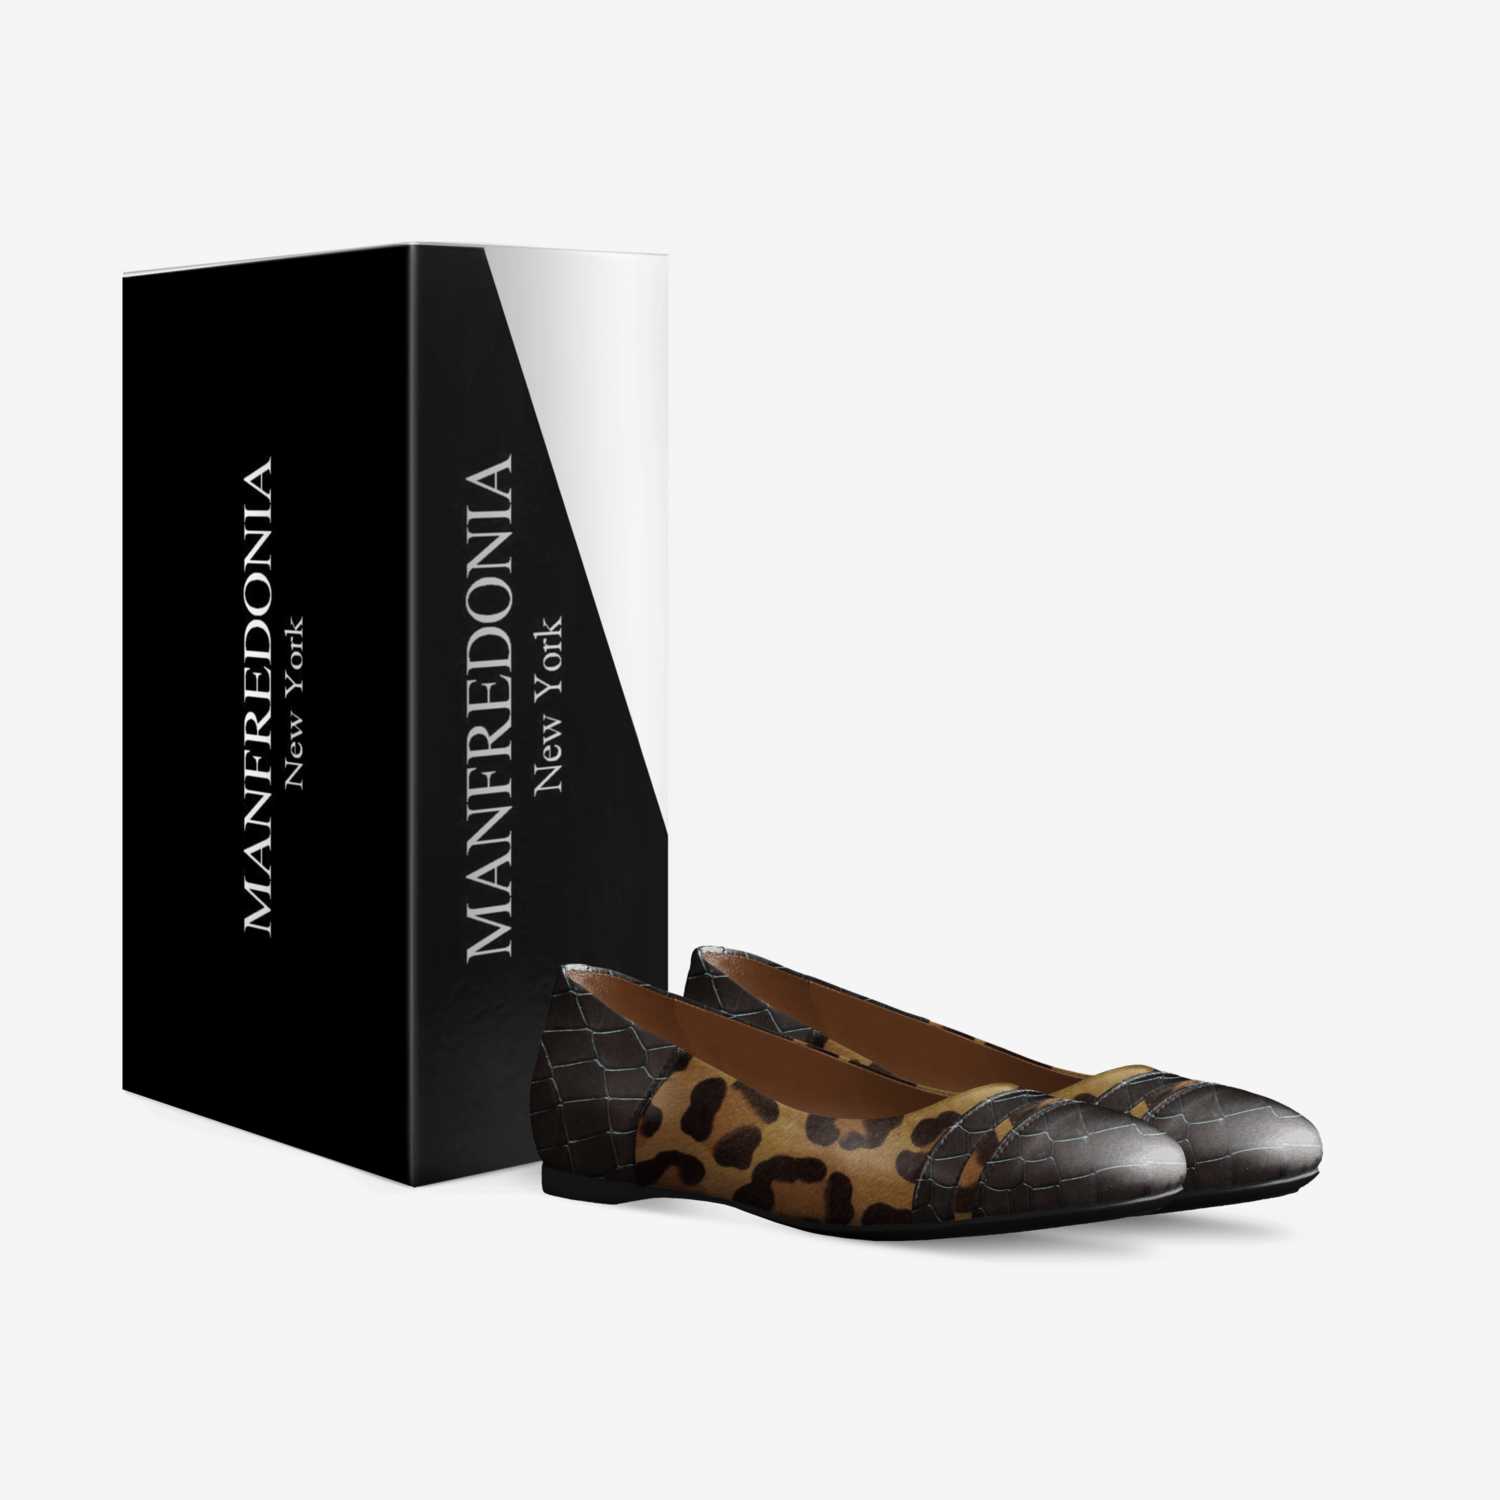 MANFREDONIA custom made in Italy shoes by Anthony Manfredonia | Box view